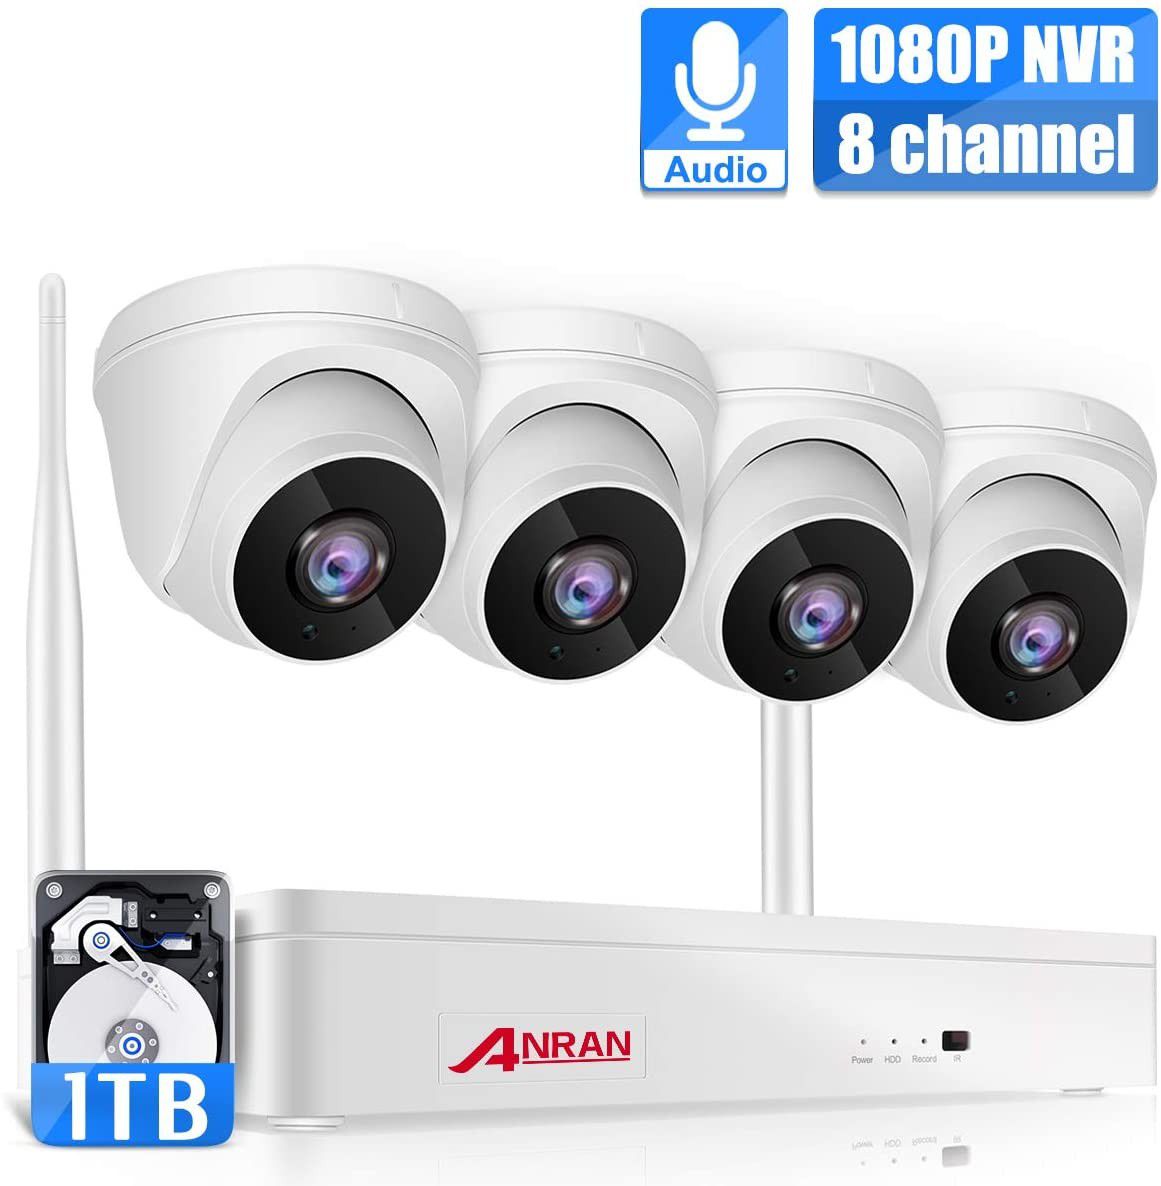 [NEW UNOPENED] Security Camera System with 4 cameras and 1TB Hard Drive